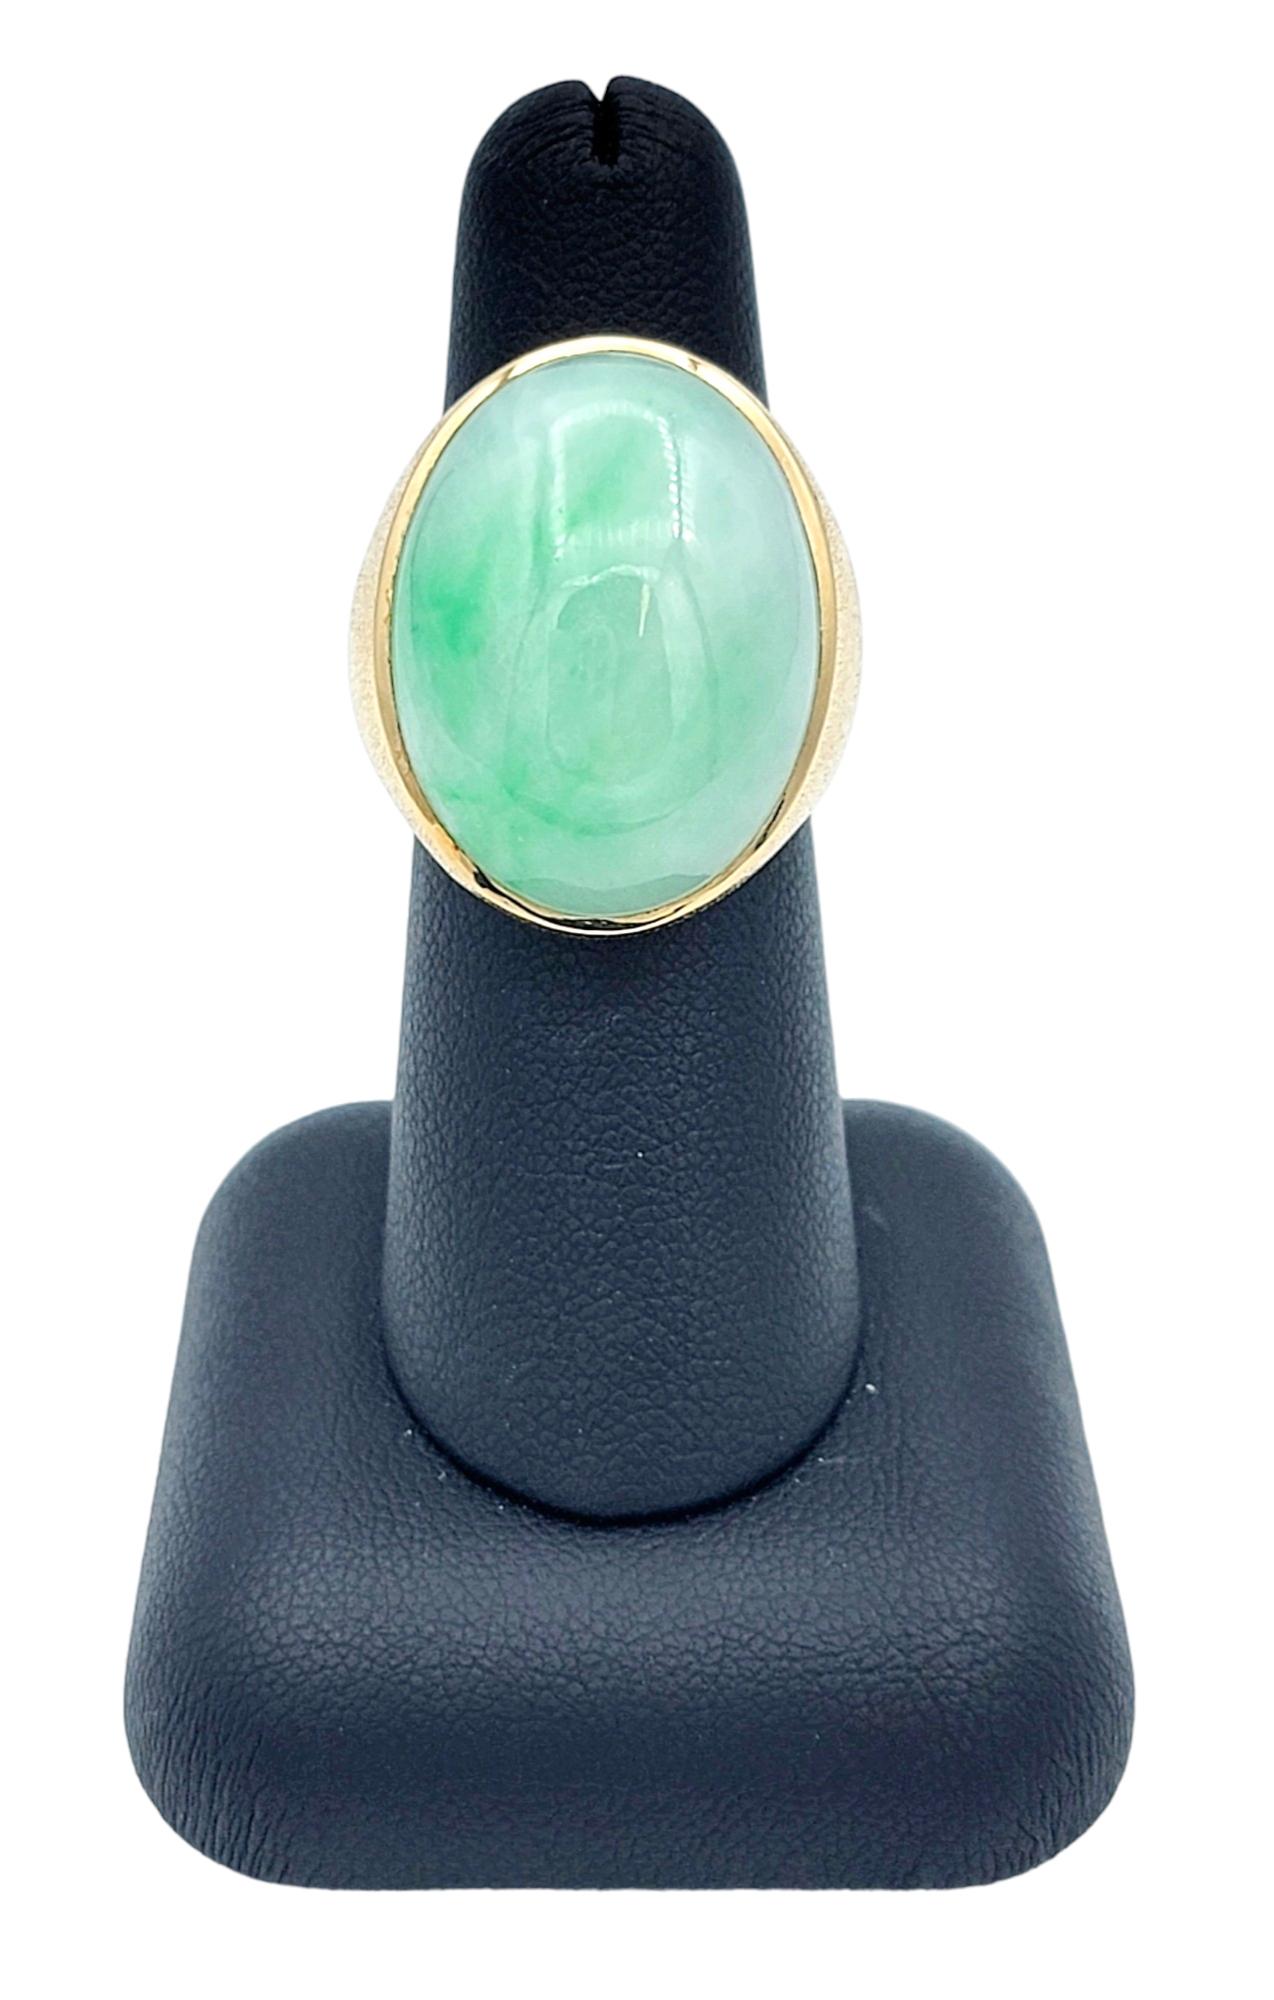 29.40 Carat Solitaire Oval Cabochon Green Nephrite Jade Ring in Yellow Gold For Sale 3